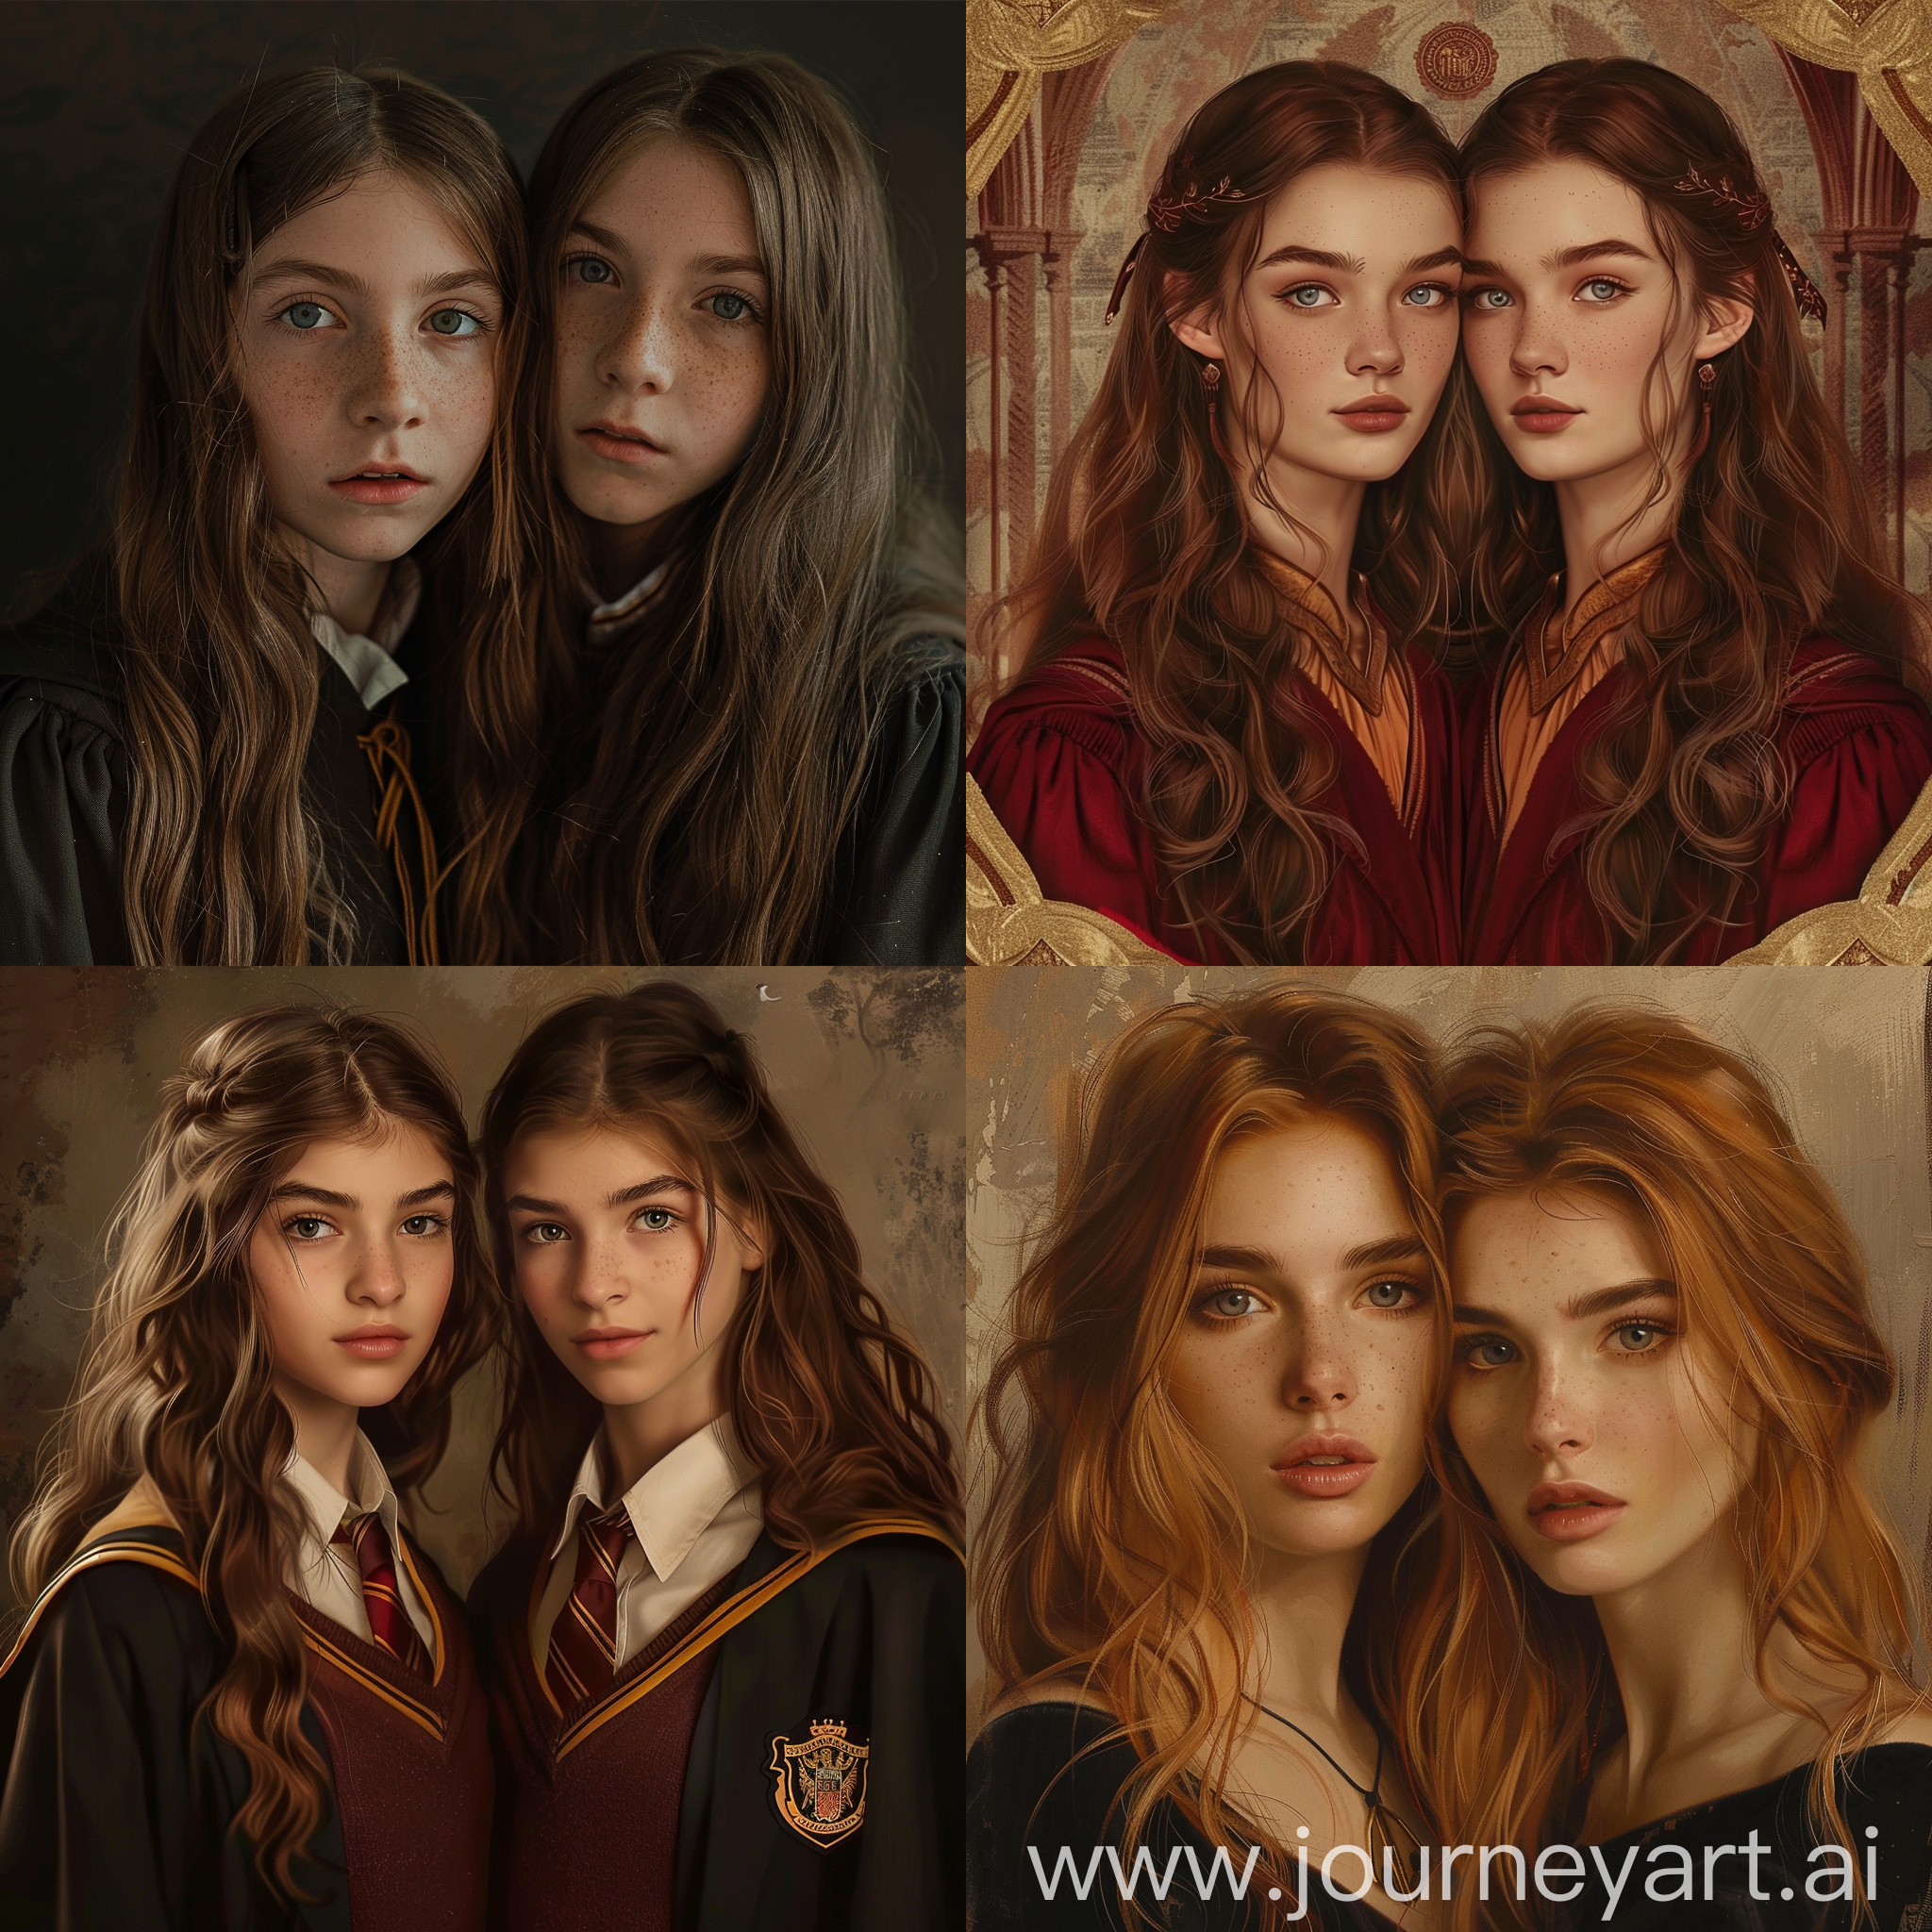 Twin sister of Harry Potter
